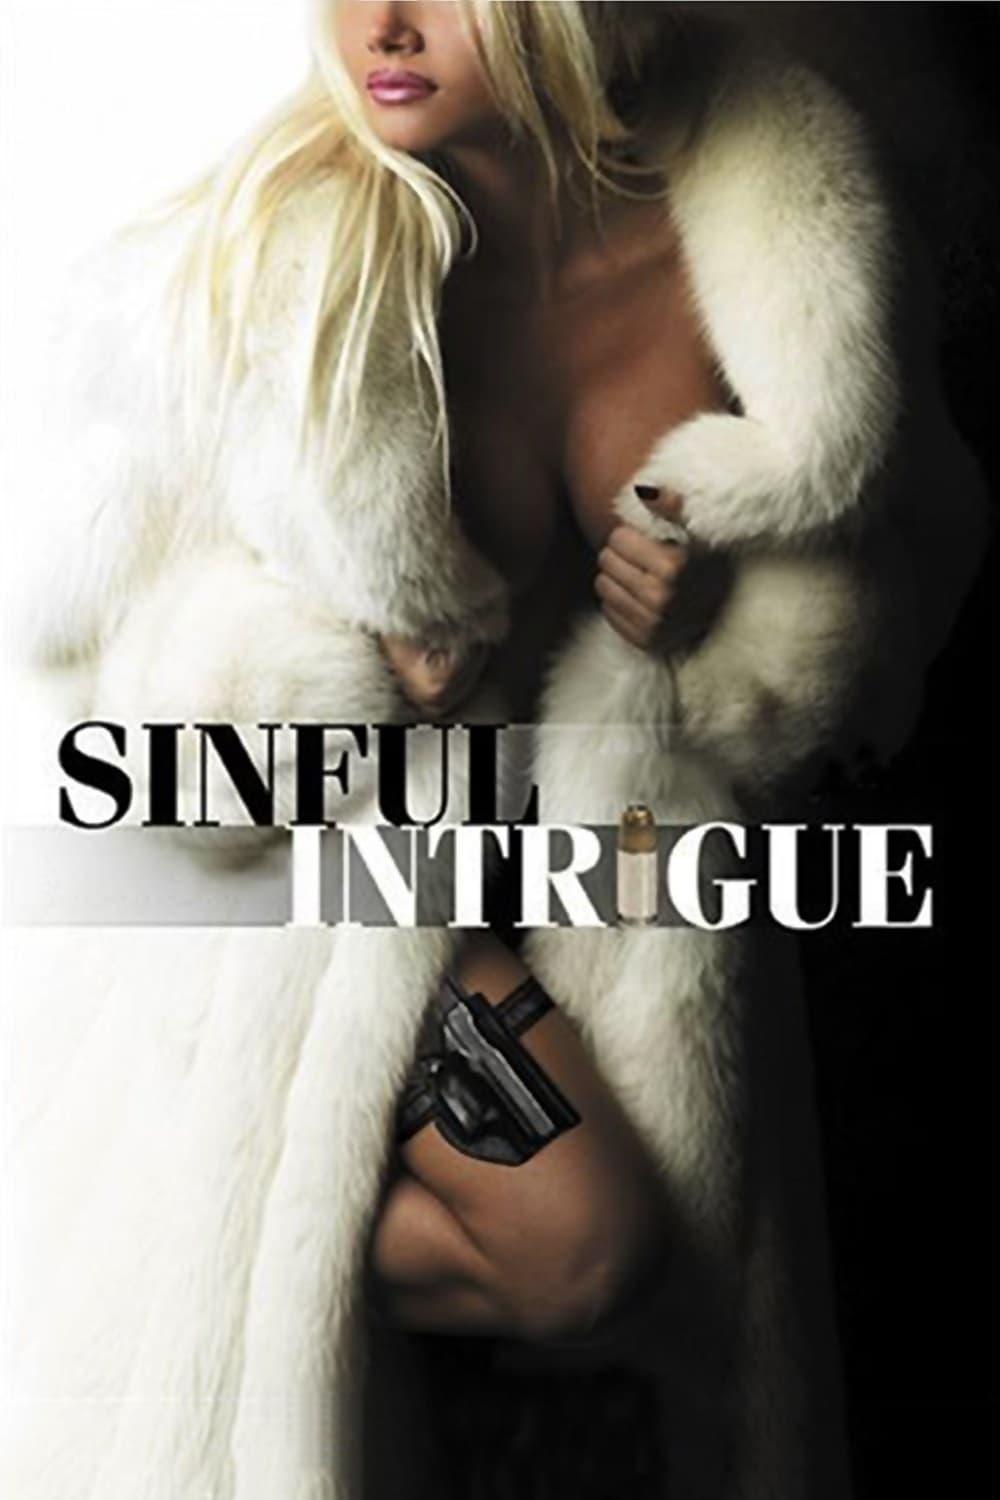 Sinful Intrigue poster